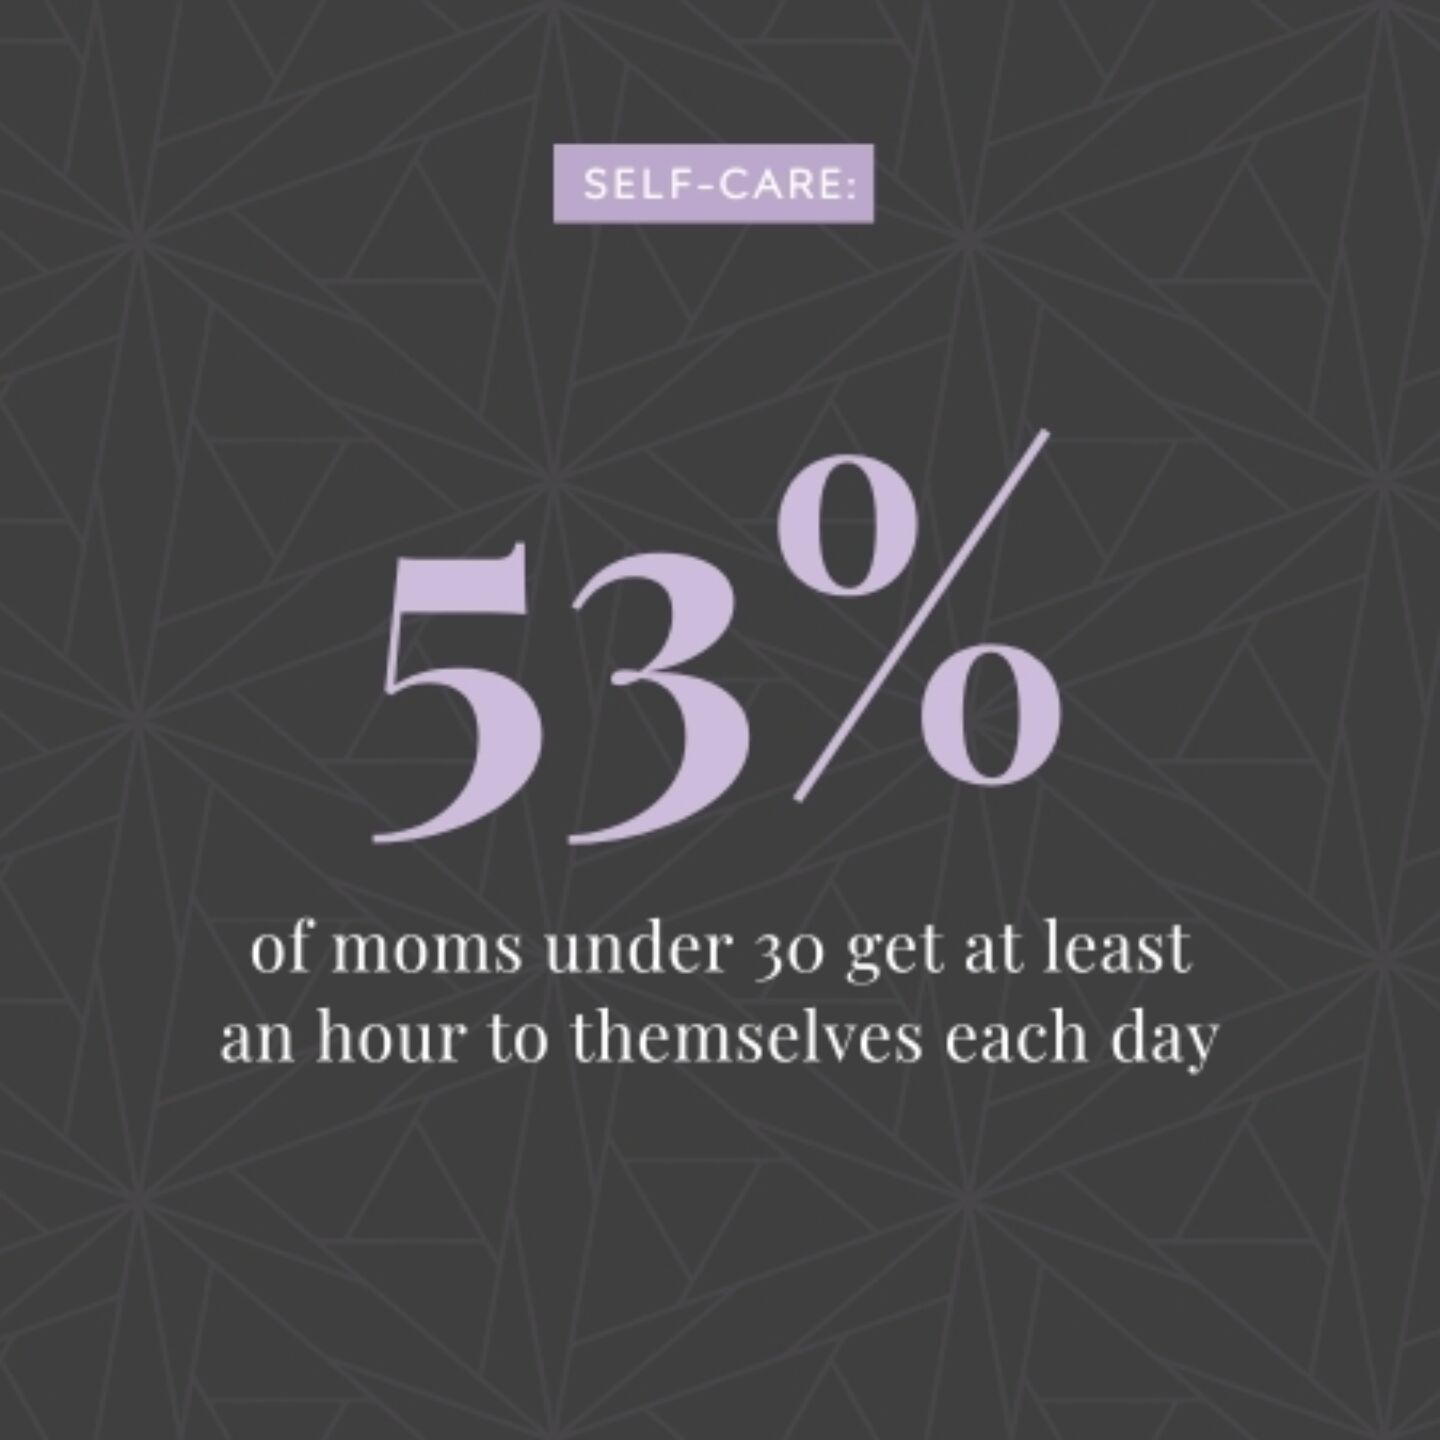 53% of moms under 30 get at least an hour to themselves each day vs. only 39% for all moms - state of motherhood